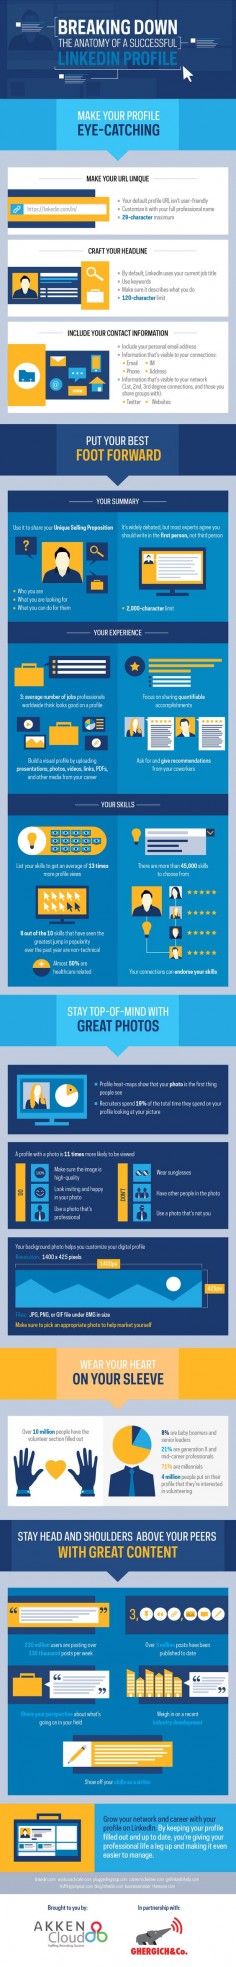 Breaking Down the Anatomy of a Successful LinkedIn Profile [INFOGRAPHIC]